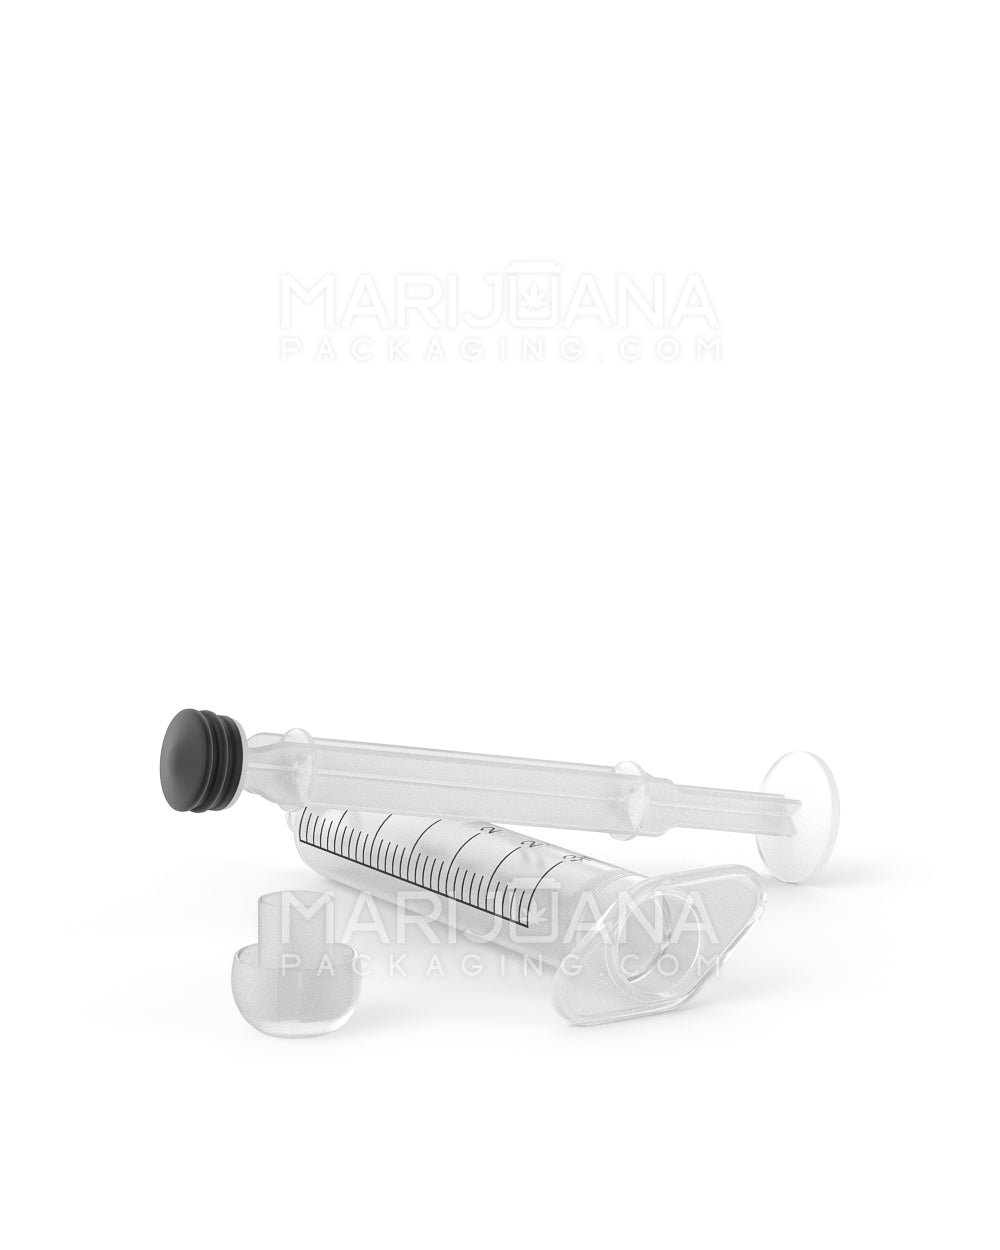 Plastic Oral Concentrate Syringes | 3mL - 0.5mL Increments | Sample - 5